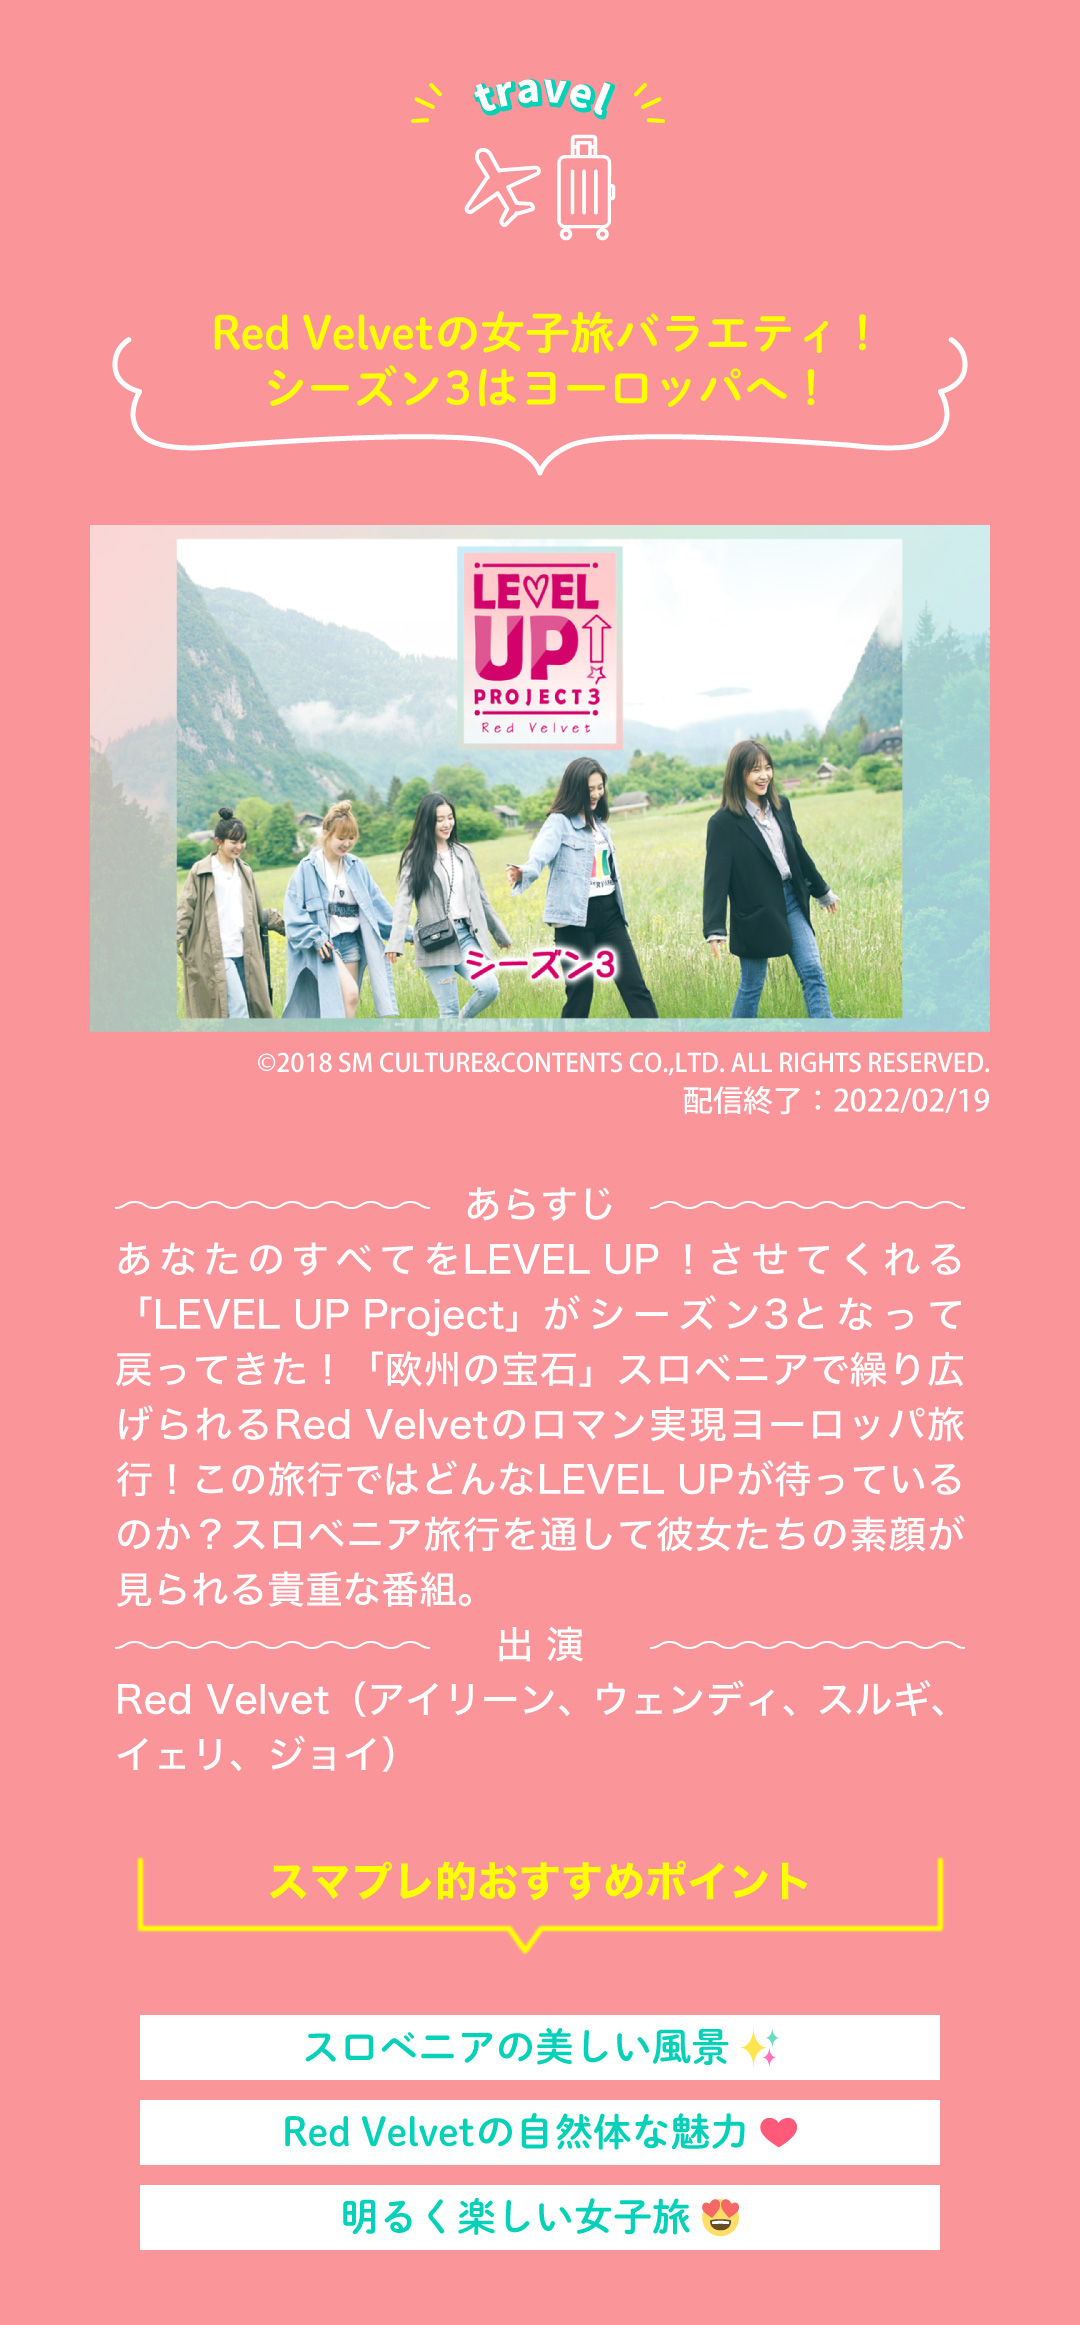 Red VelvetのLEVEL UP Project シーズン3